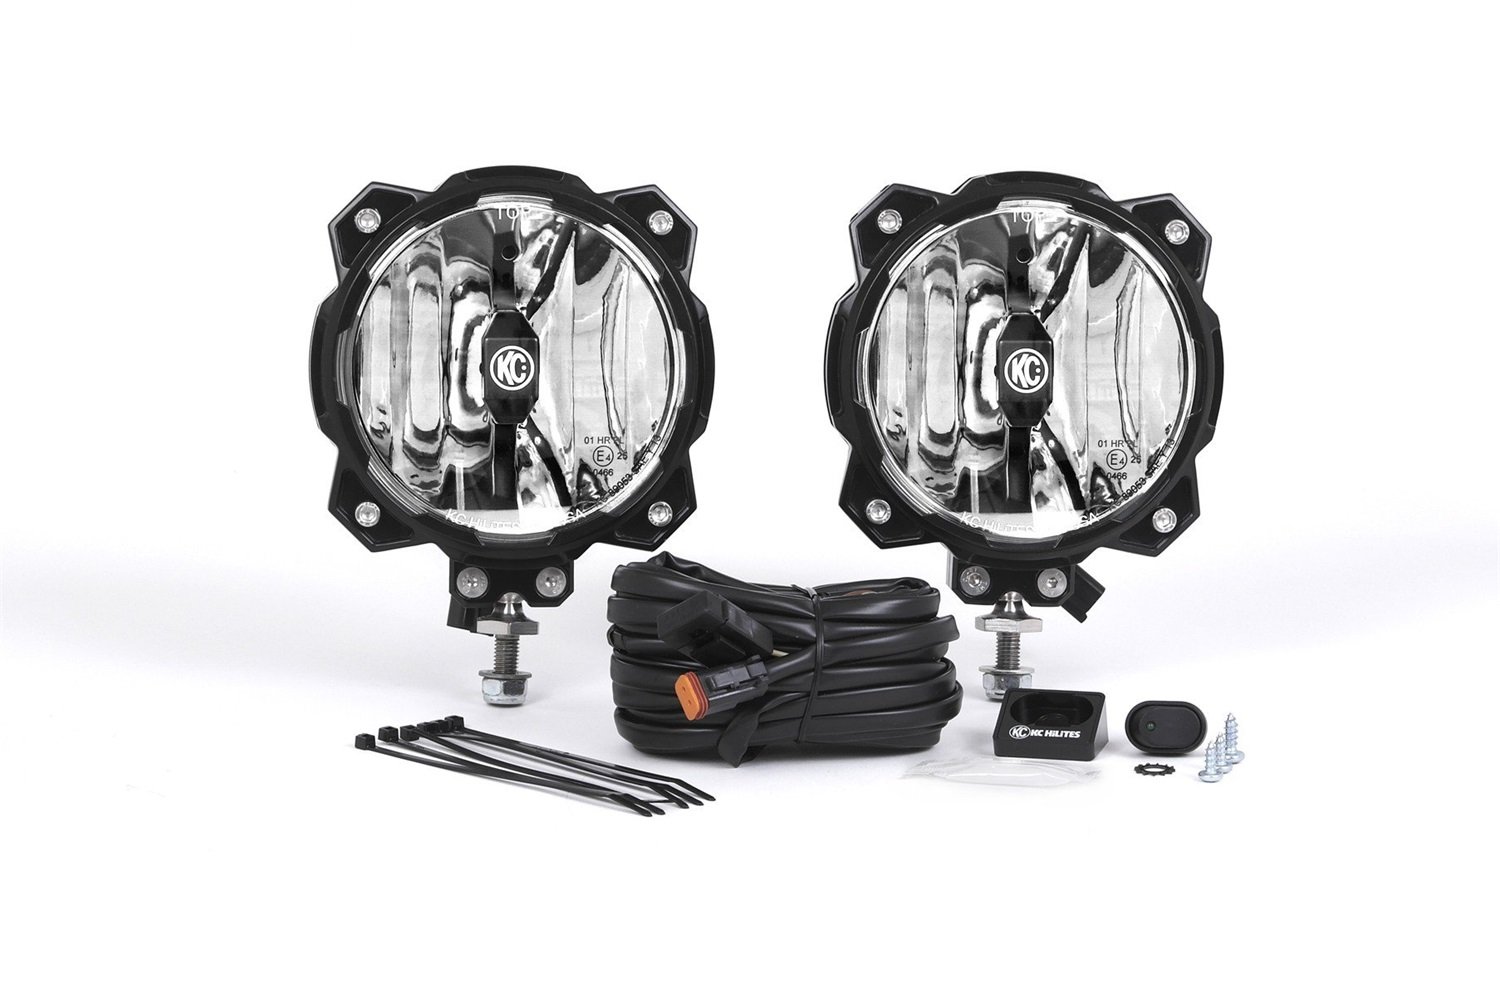 Pro6 Gravity LED Single Mnt Wide-40 System pair